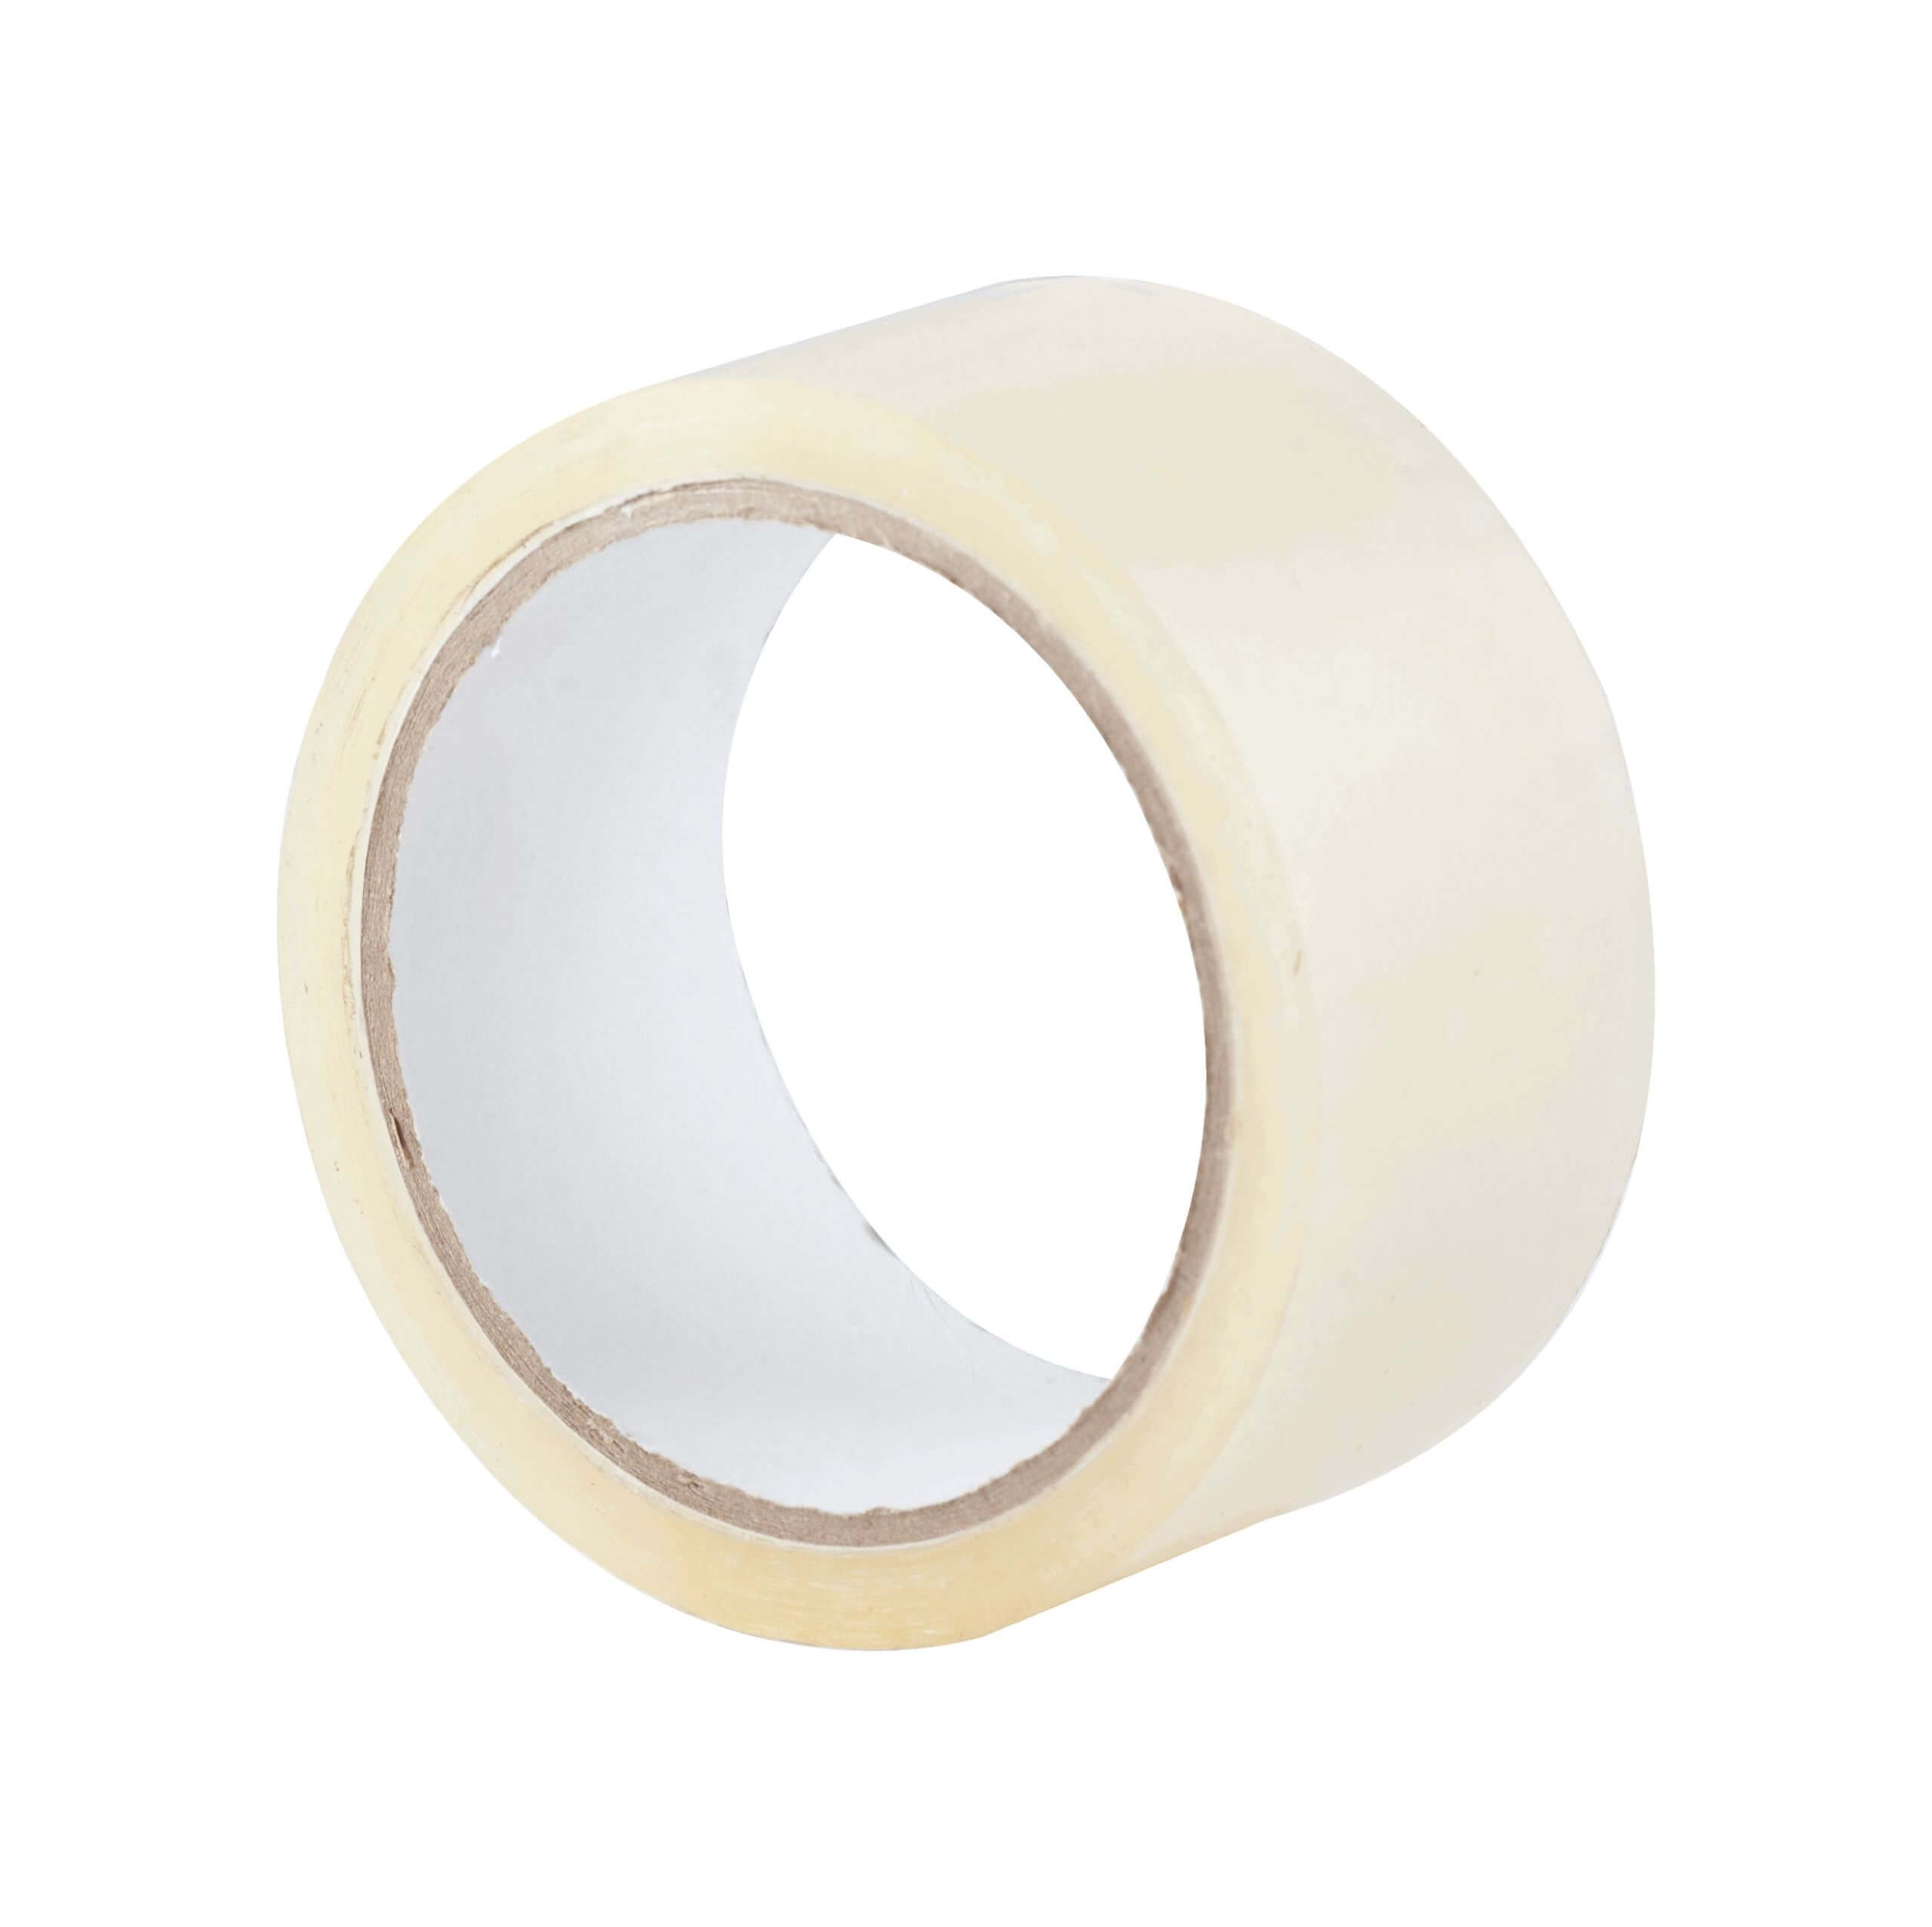 An image of our Acrylic Adhesive Tape.